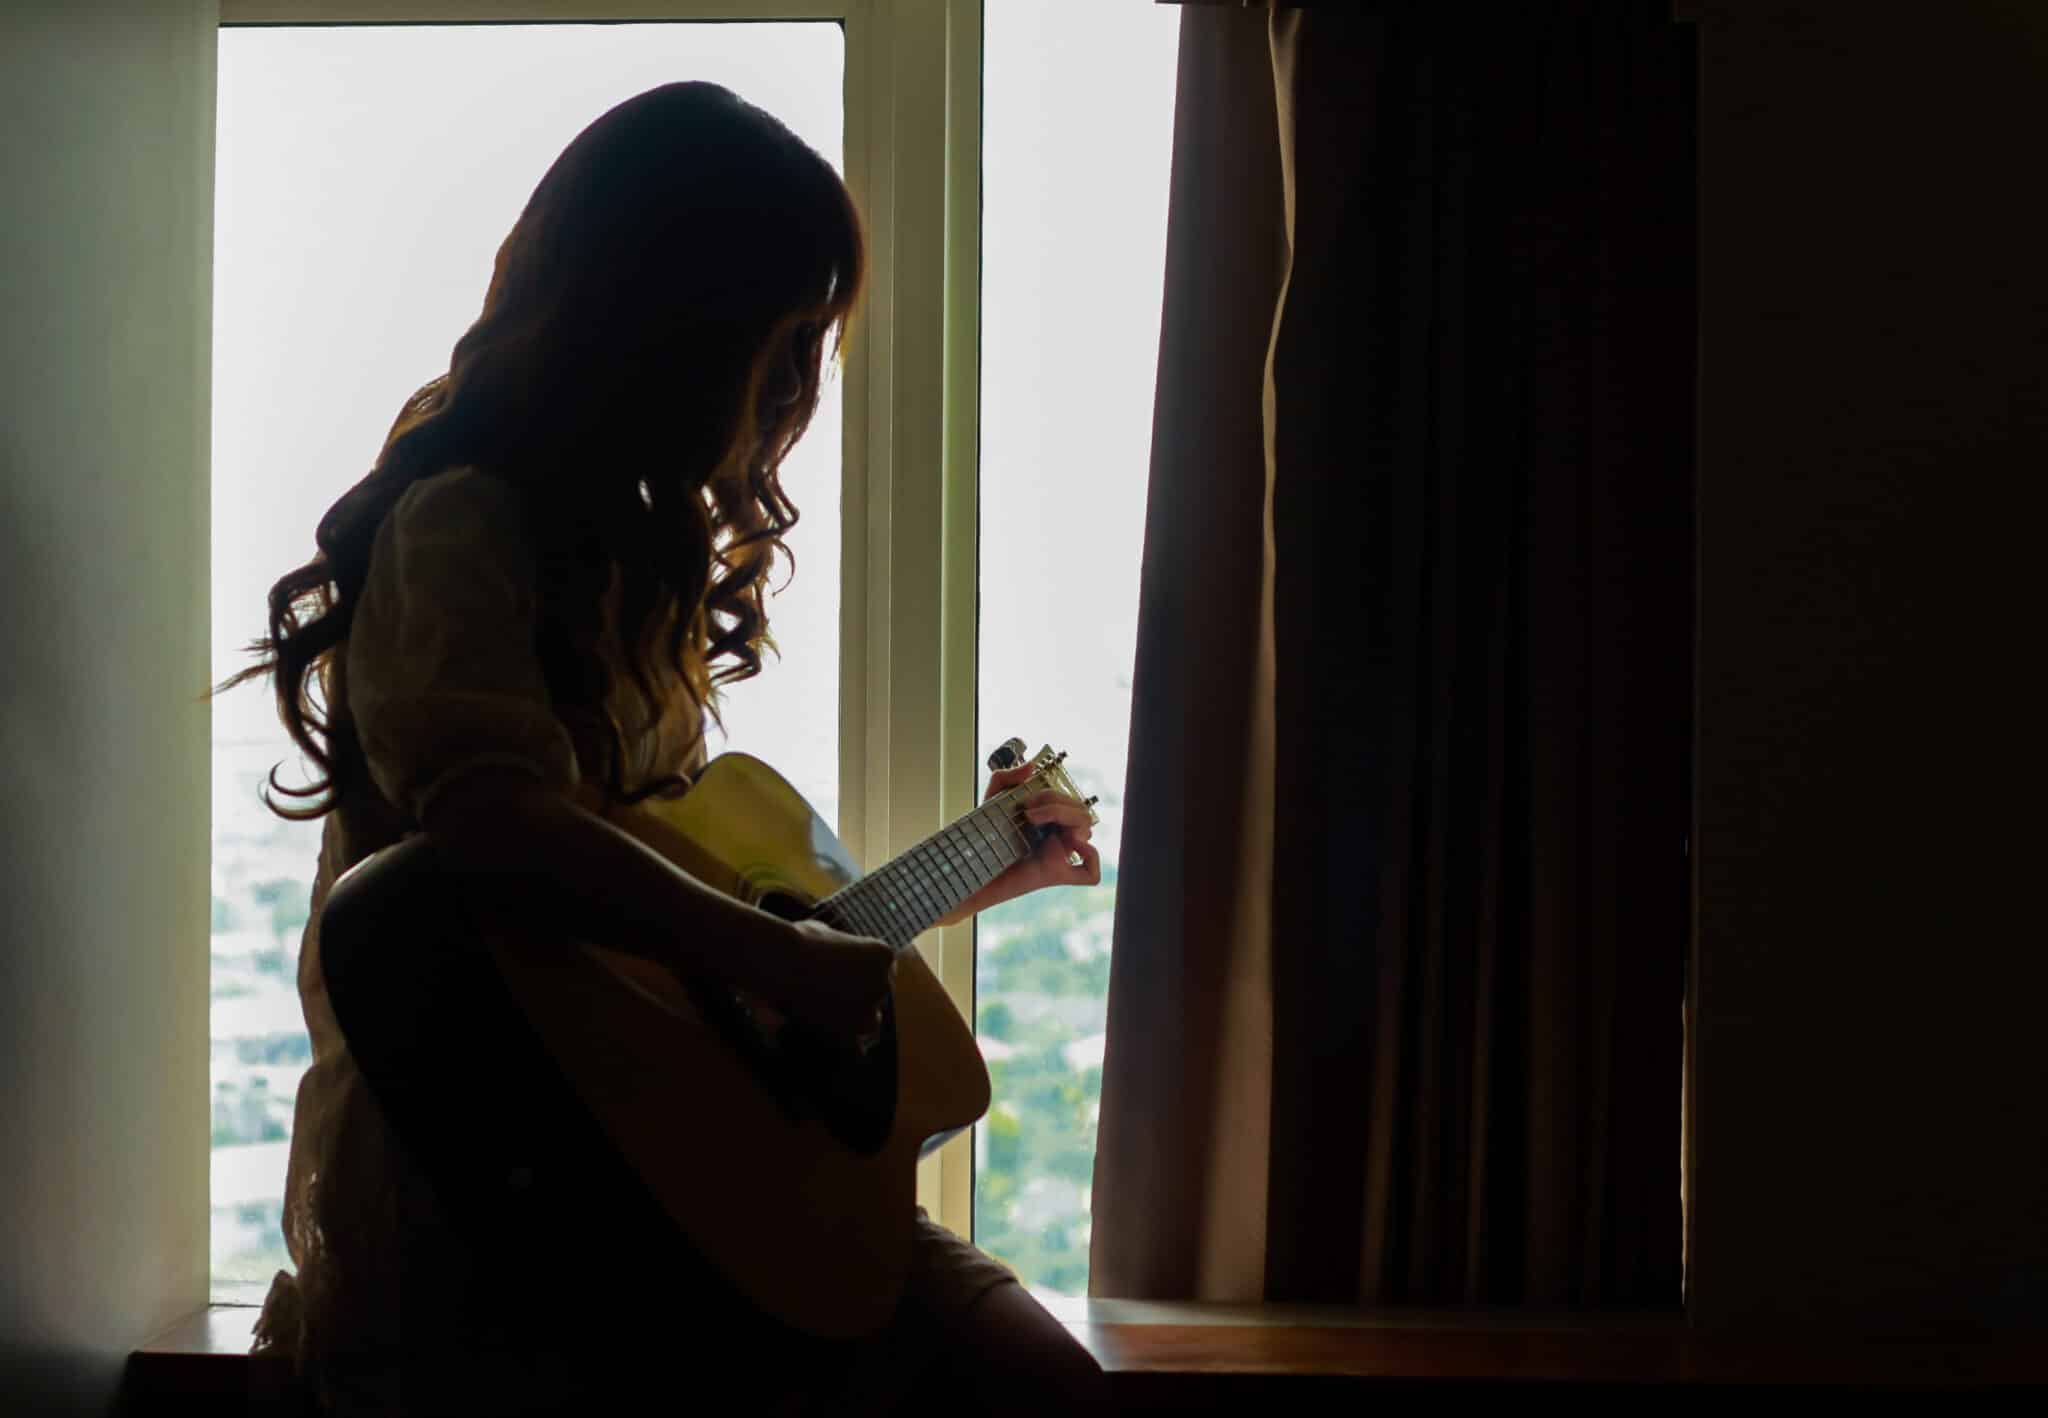 Silhouette of a young woman playing guitar